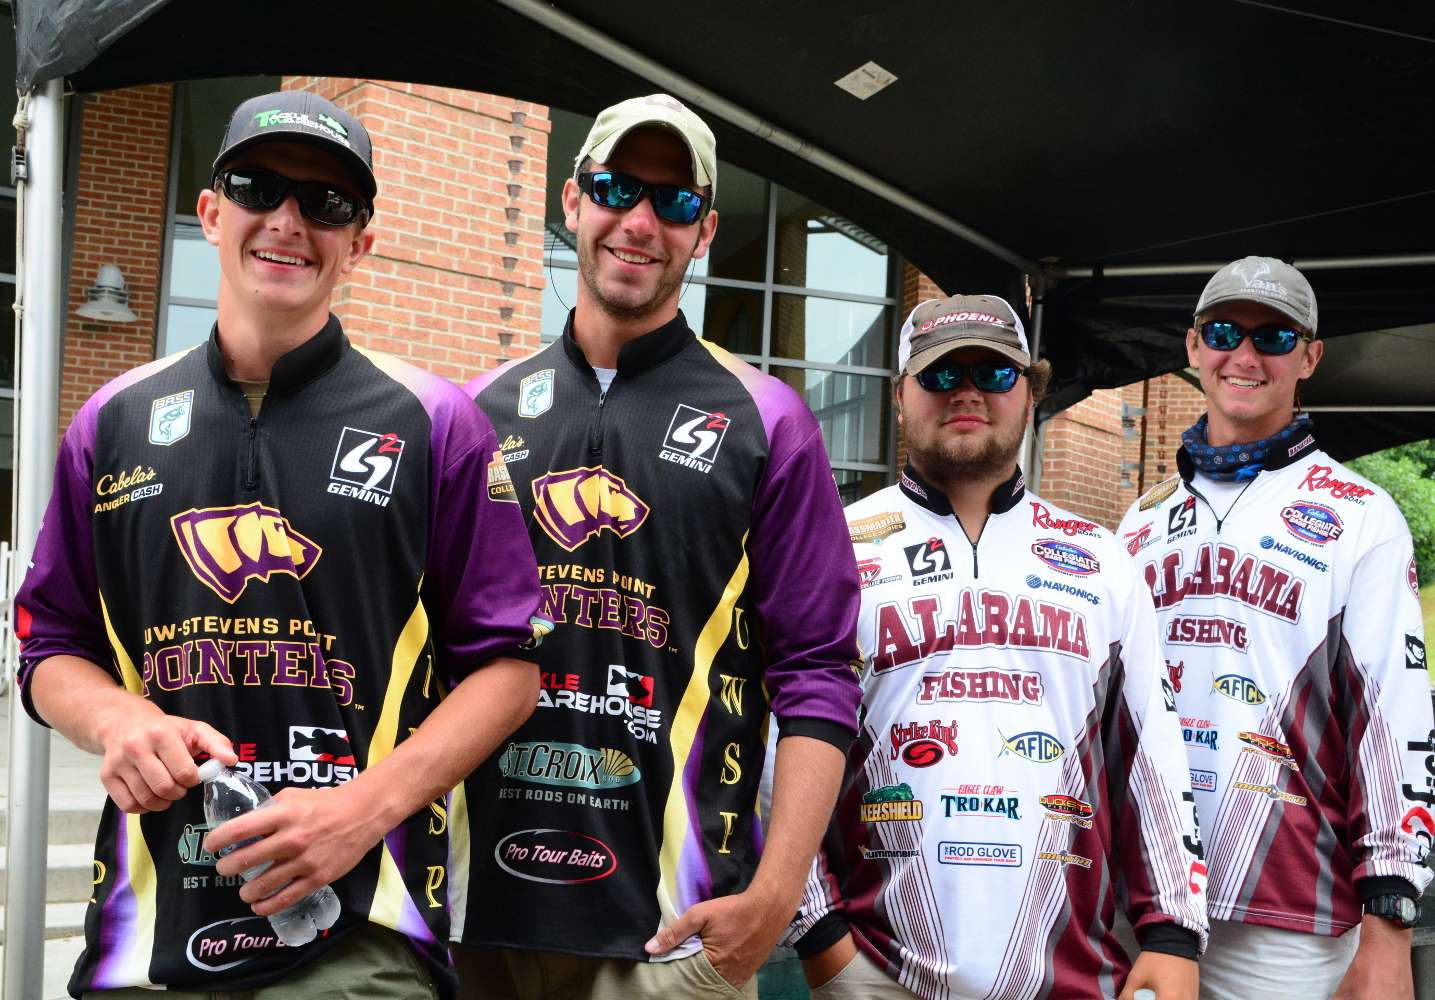 The first anglers to weigh in are smiling, but they say they donât have much to smile about. Tough day, they said.